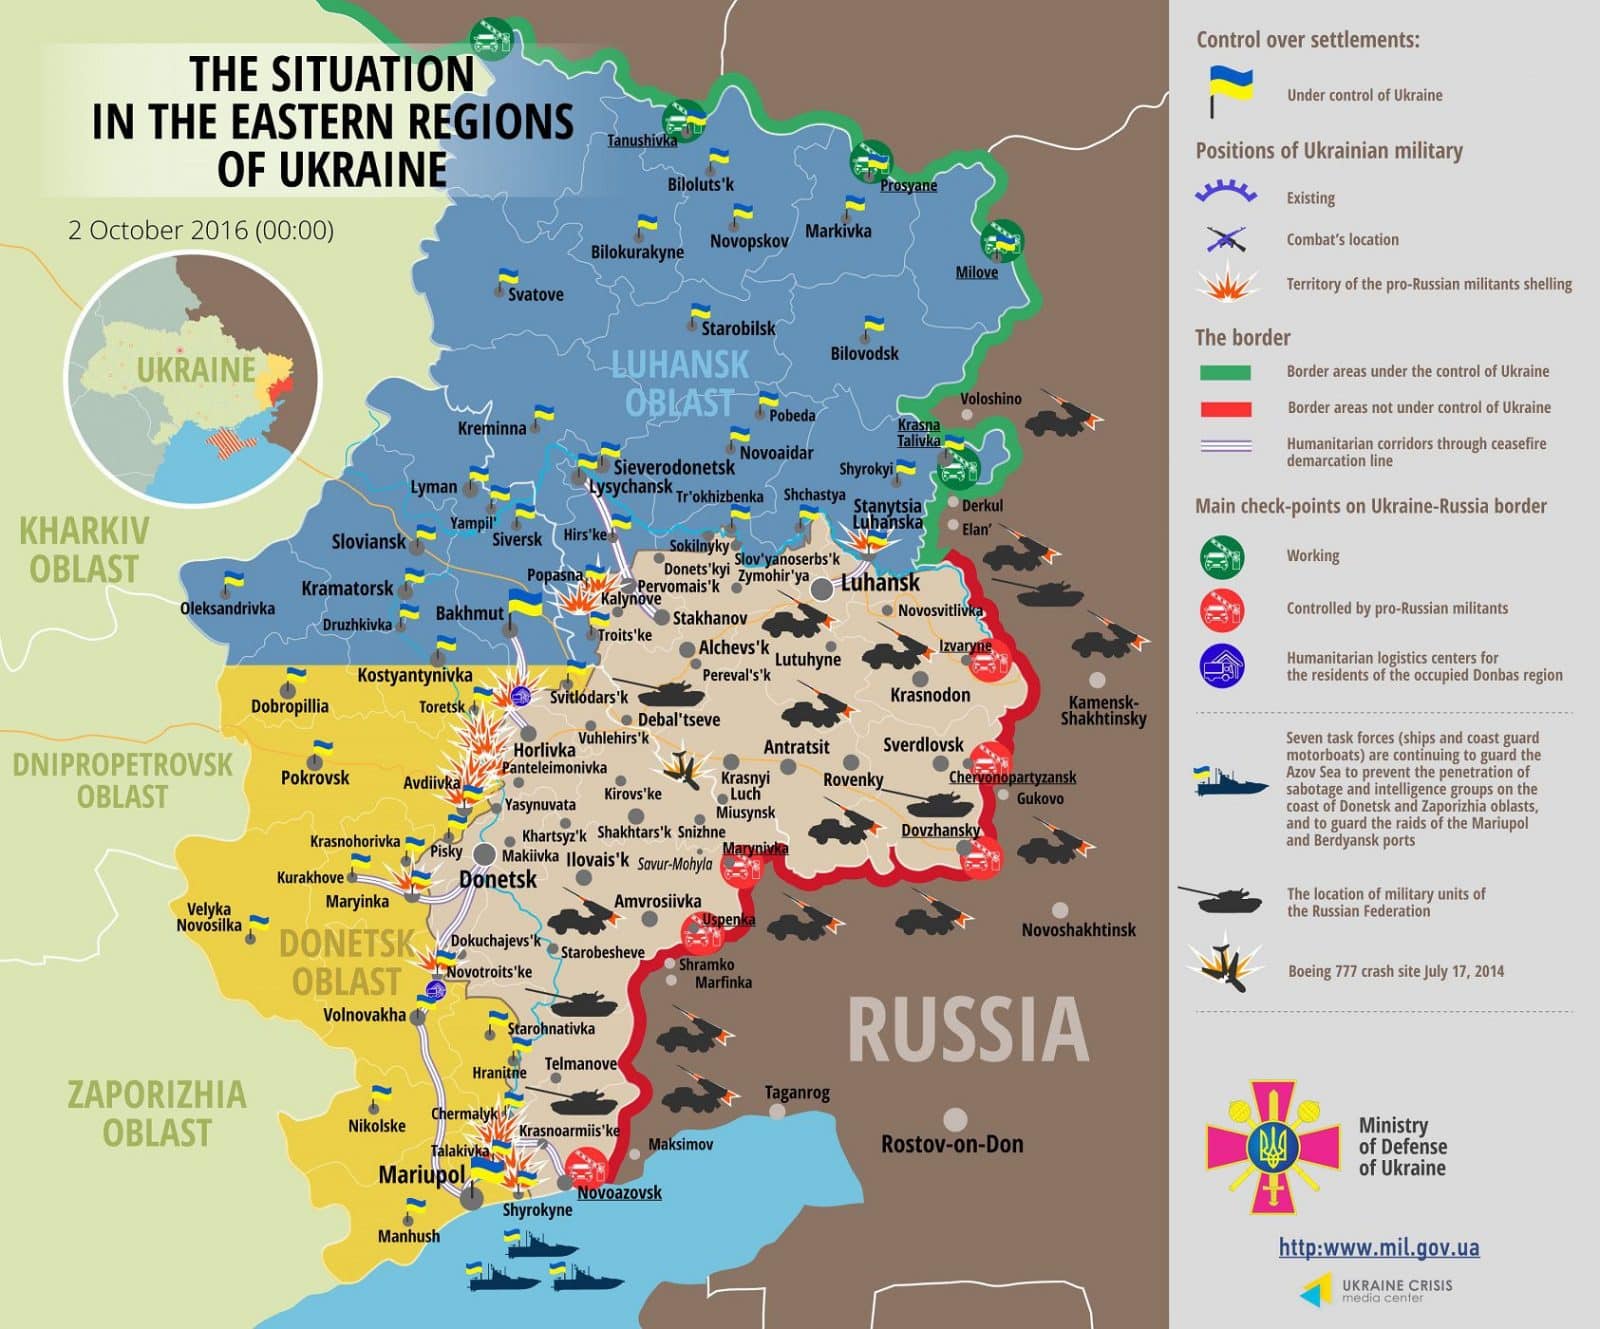 Russian troops continue ceasefire violations in Ukraine: almost 50 attacks in past 24 hours